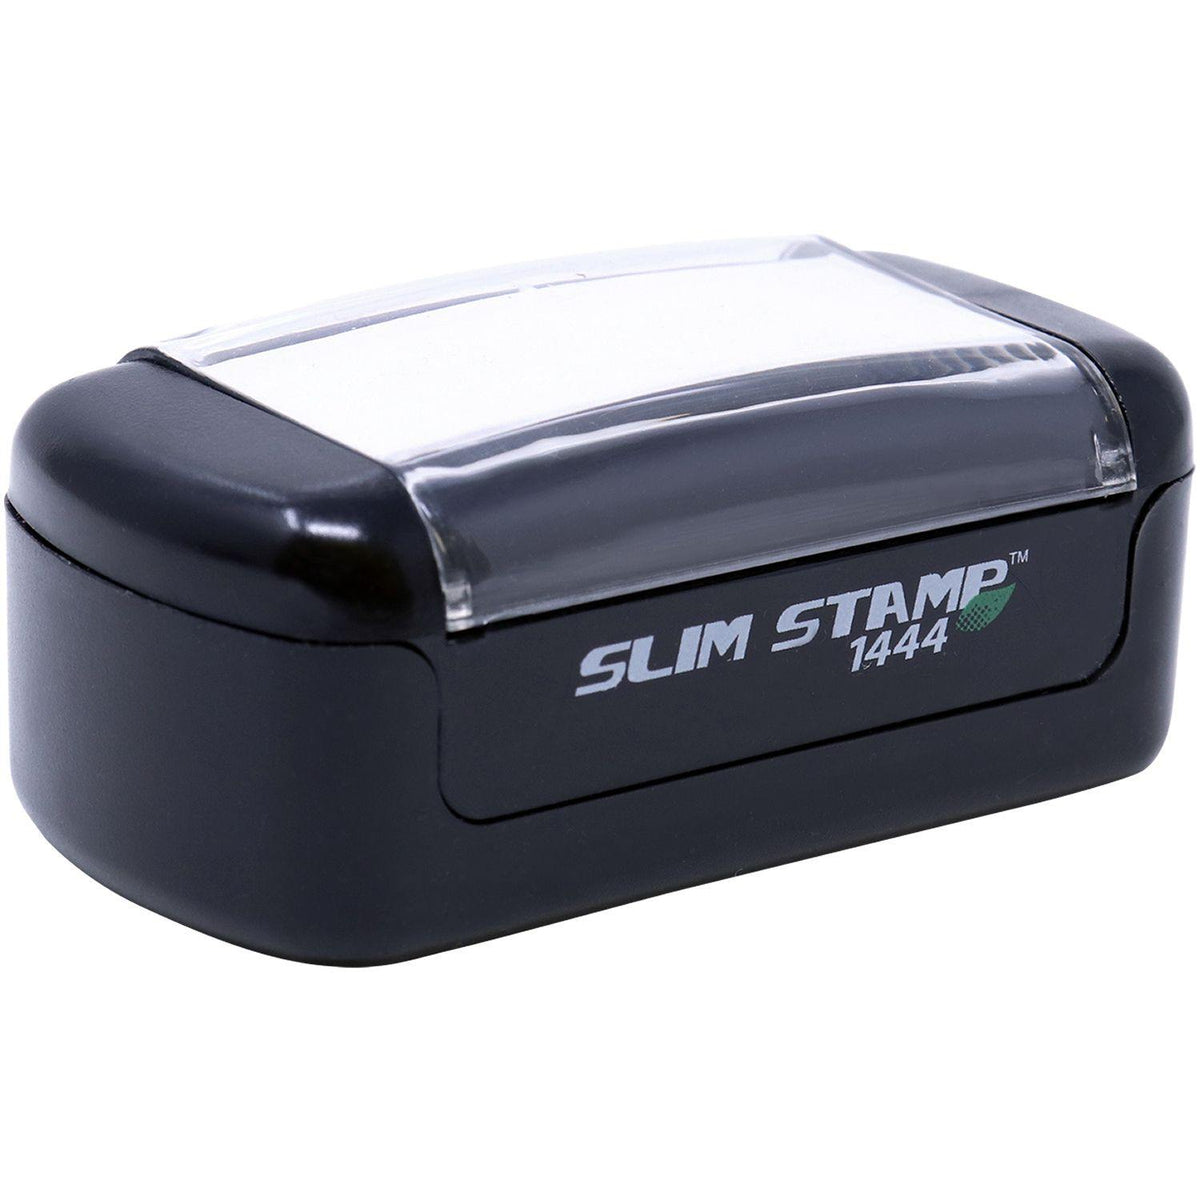 Alt View of Slim Pre-Inked Covid-19 Patient Stamp Mount Angle